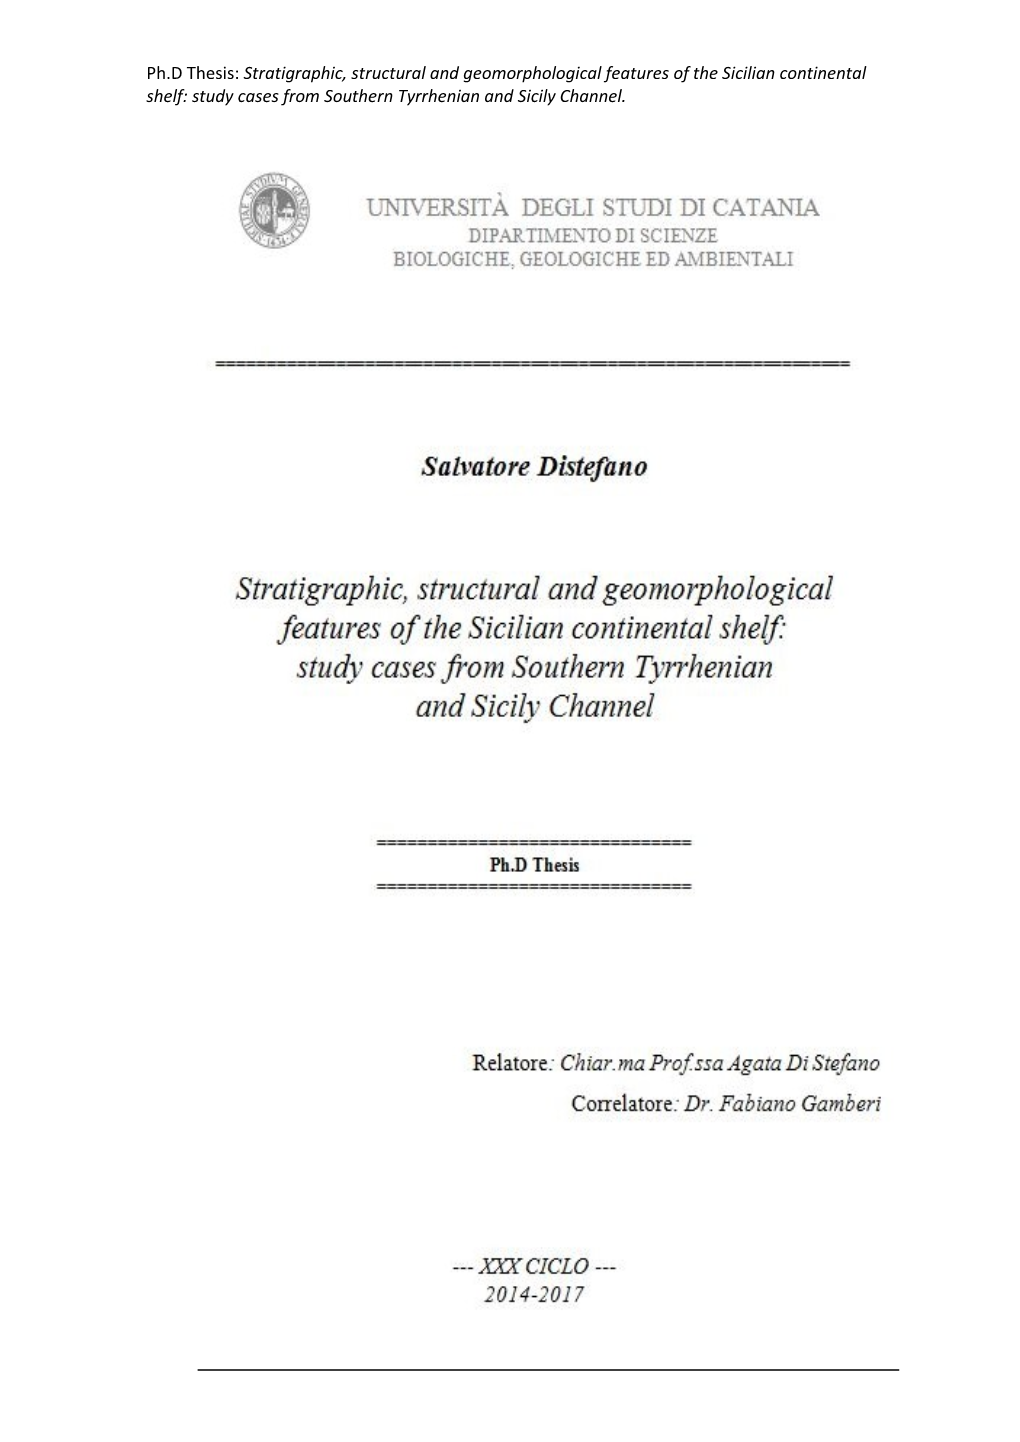 Ph.D Thesis: Stratigraphic, Structural and Geomorphological Features of the Sicilian Continental Shelf: Study Cases from Southern Tyrrhenian and Sicily Channel